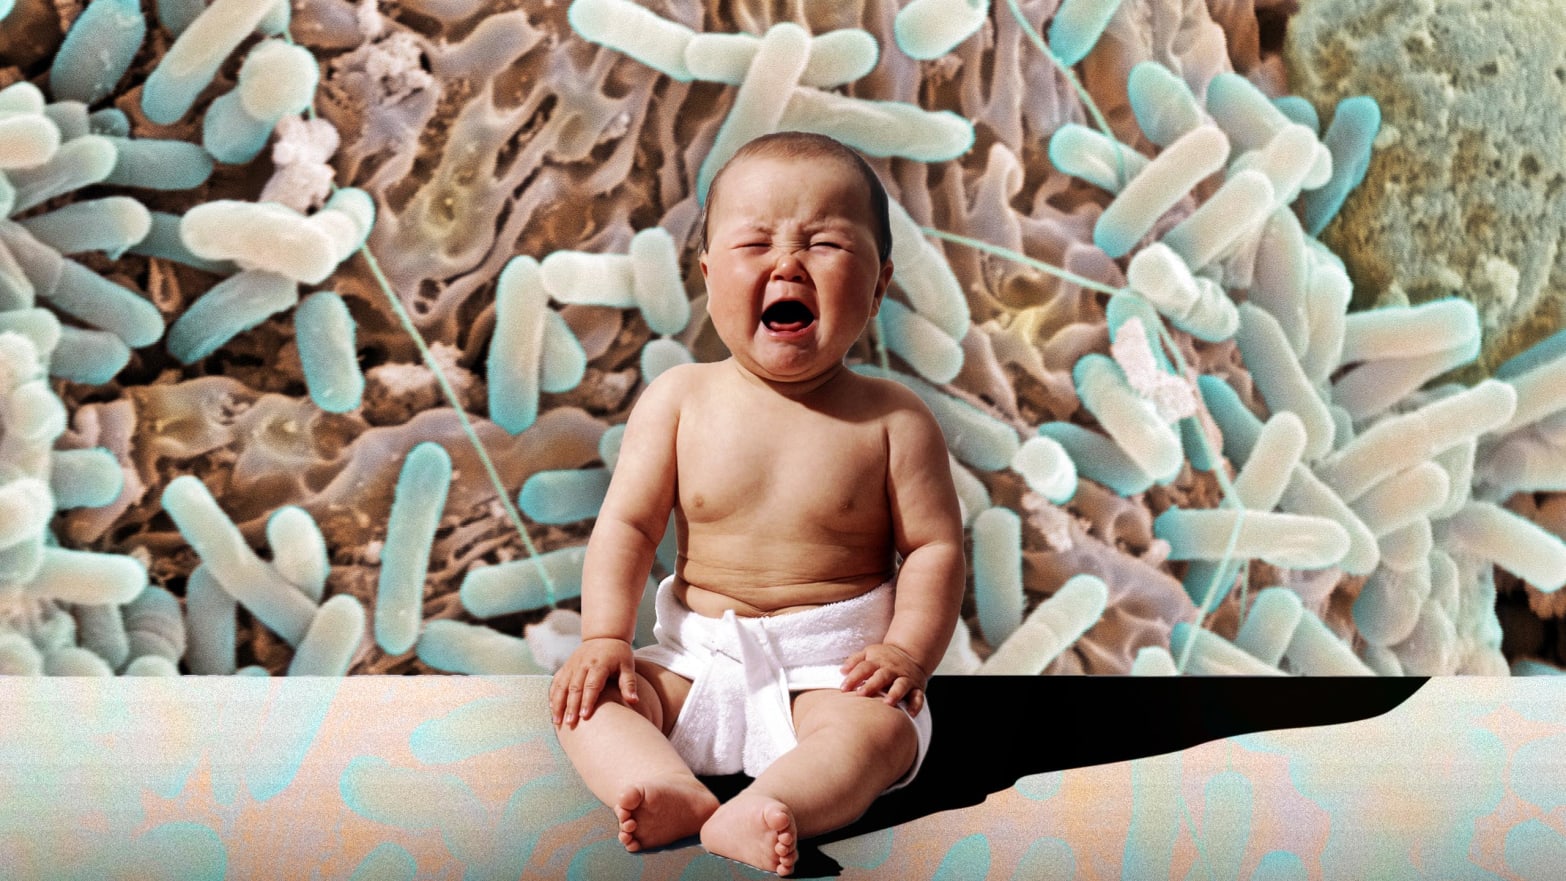 baby in diapers crying in foreground, background is image of bacteria microbiome gut bifidobacteria evolve evivo probiotic